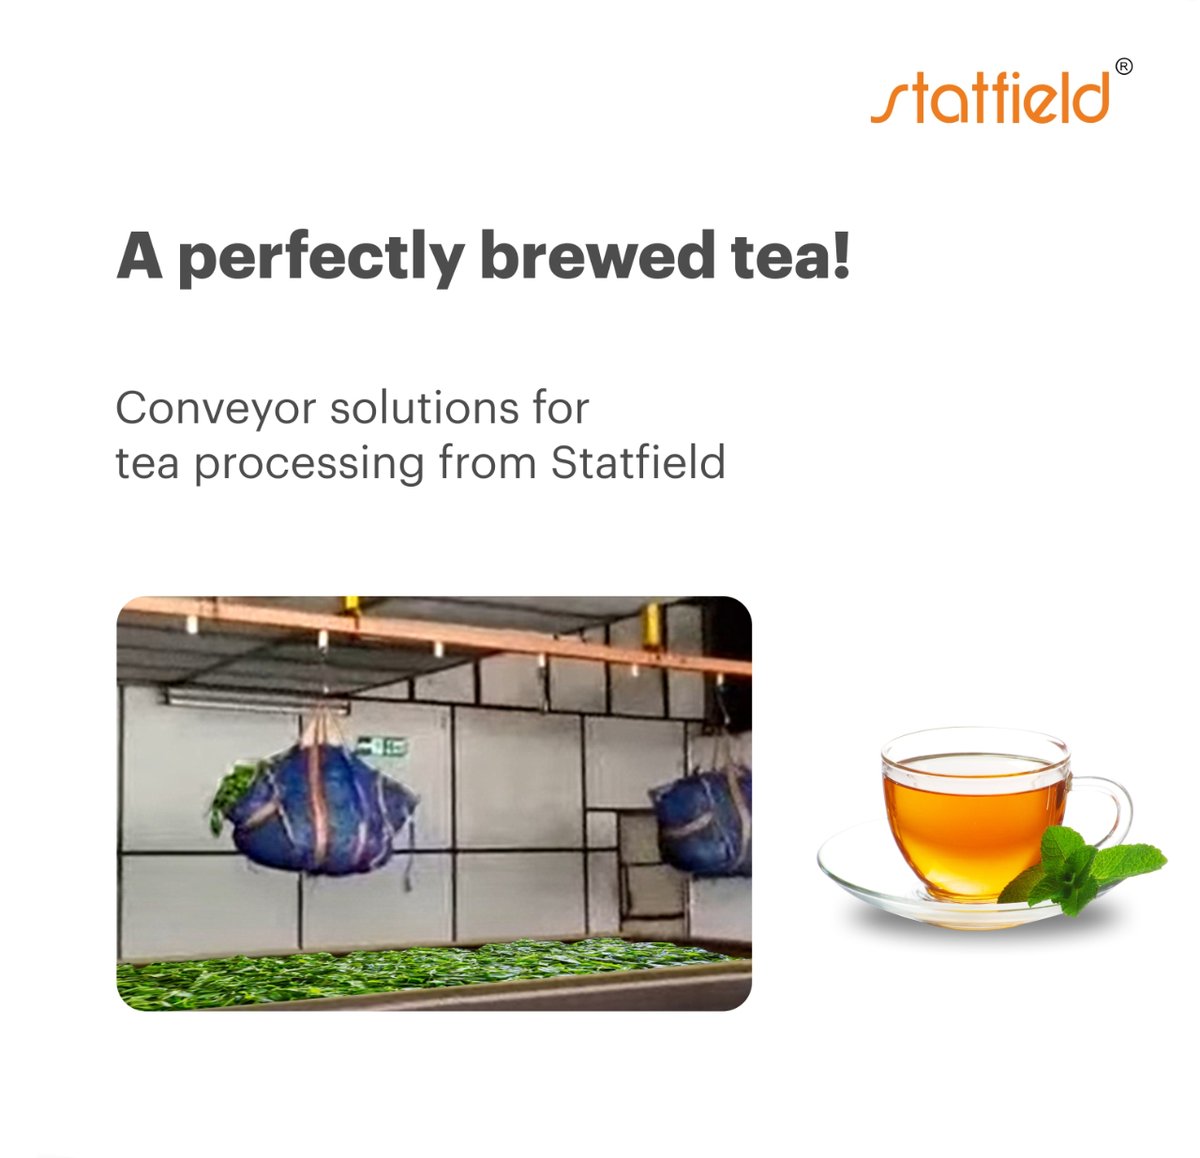 Statfield’s conveyors ensure the precision transfer of tea leaves across the tea manufacturing unit helping the tea manufacturers bring the best quality tea to their customers

#OverheadConveyor #MaterialHandling #ChainConveyor #TeaManufactures #TeaProcessing